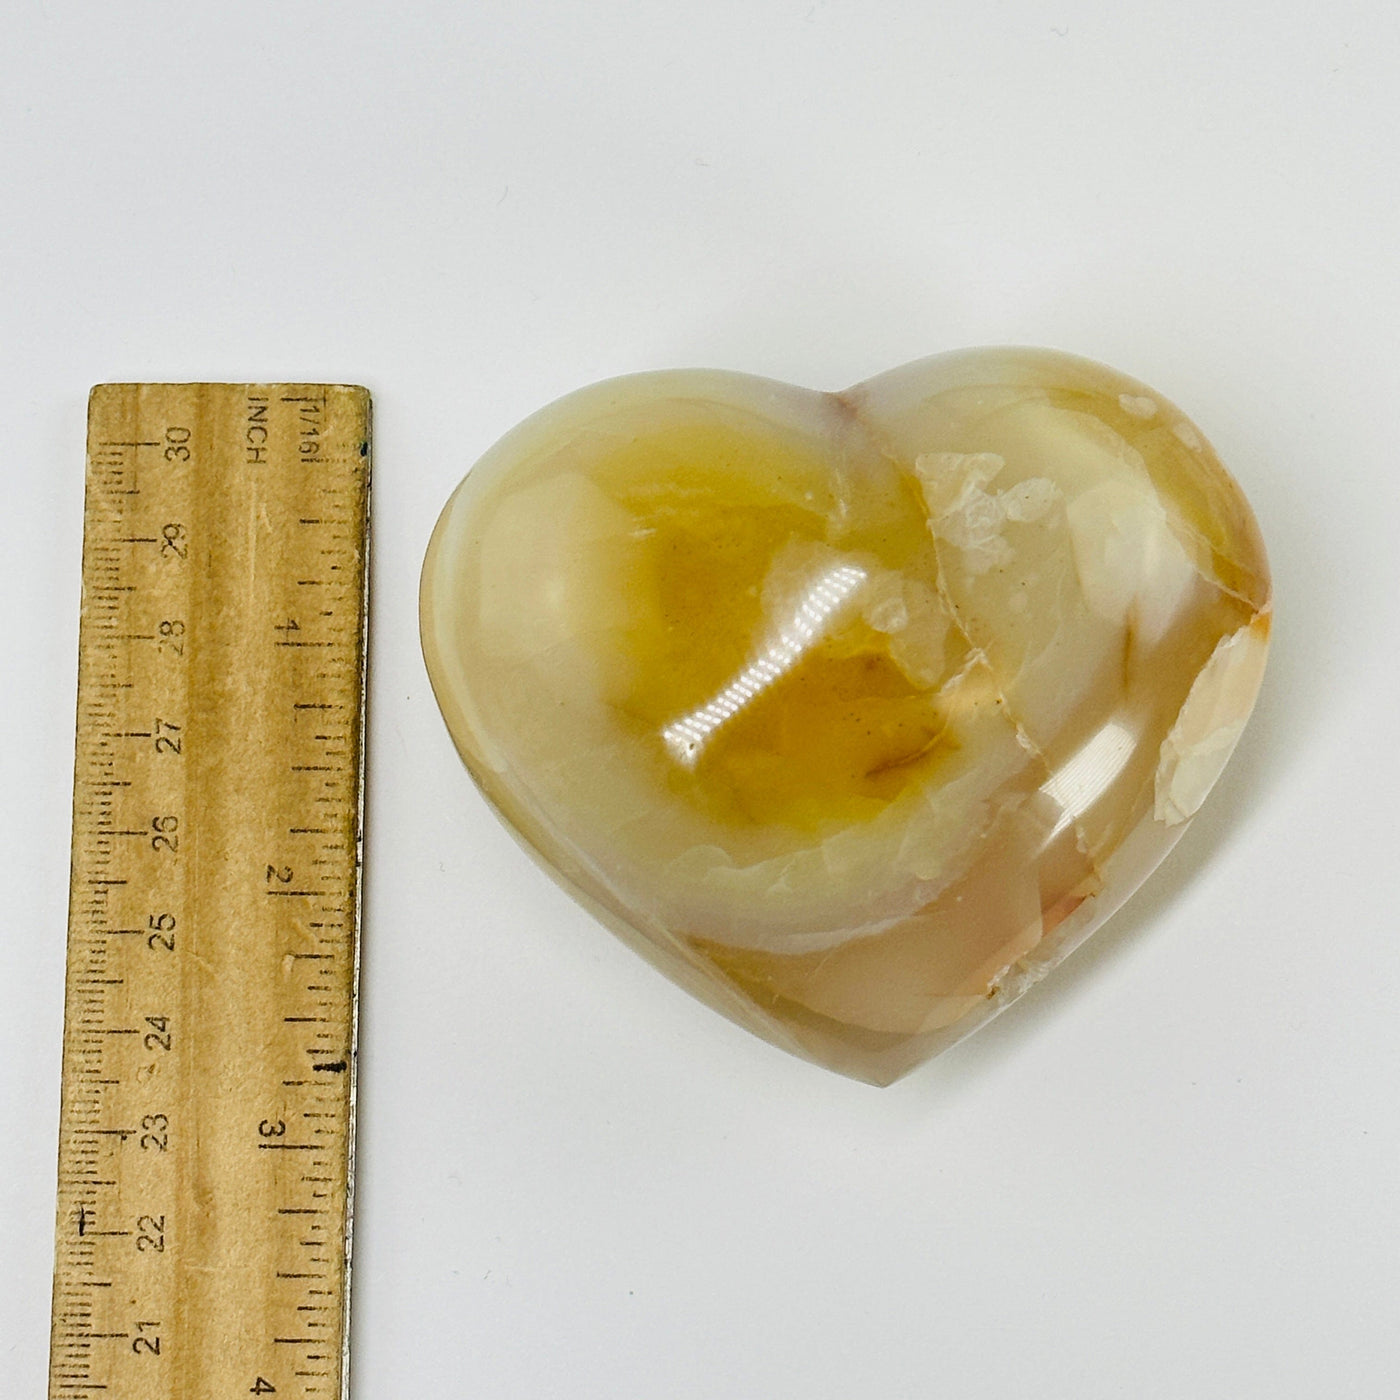 carnelian heart next to a ruler for size reference